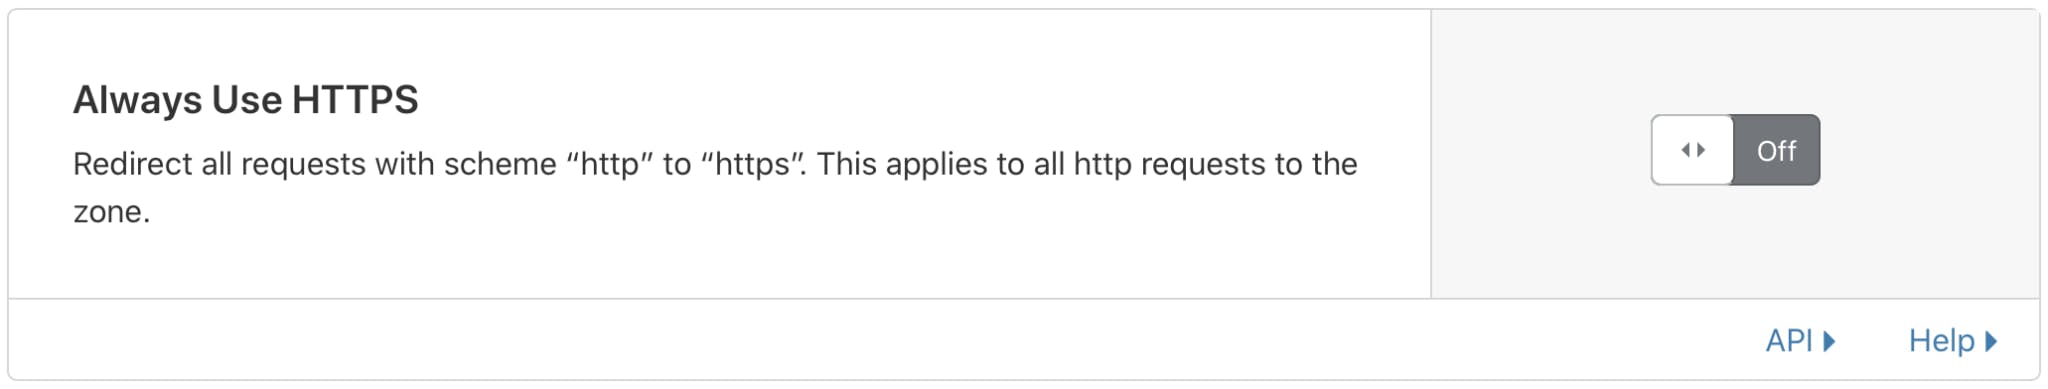 Cloudflare always use HTTPS feature